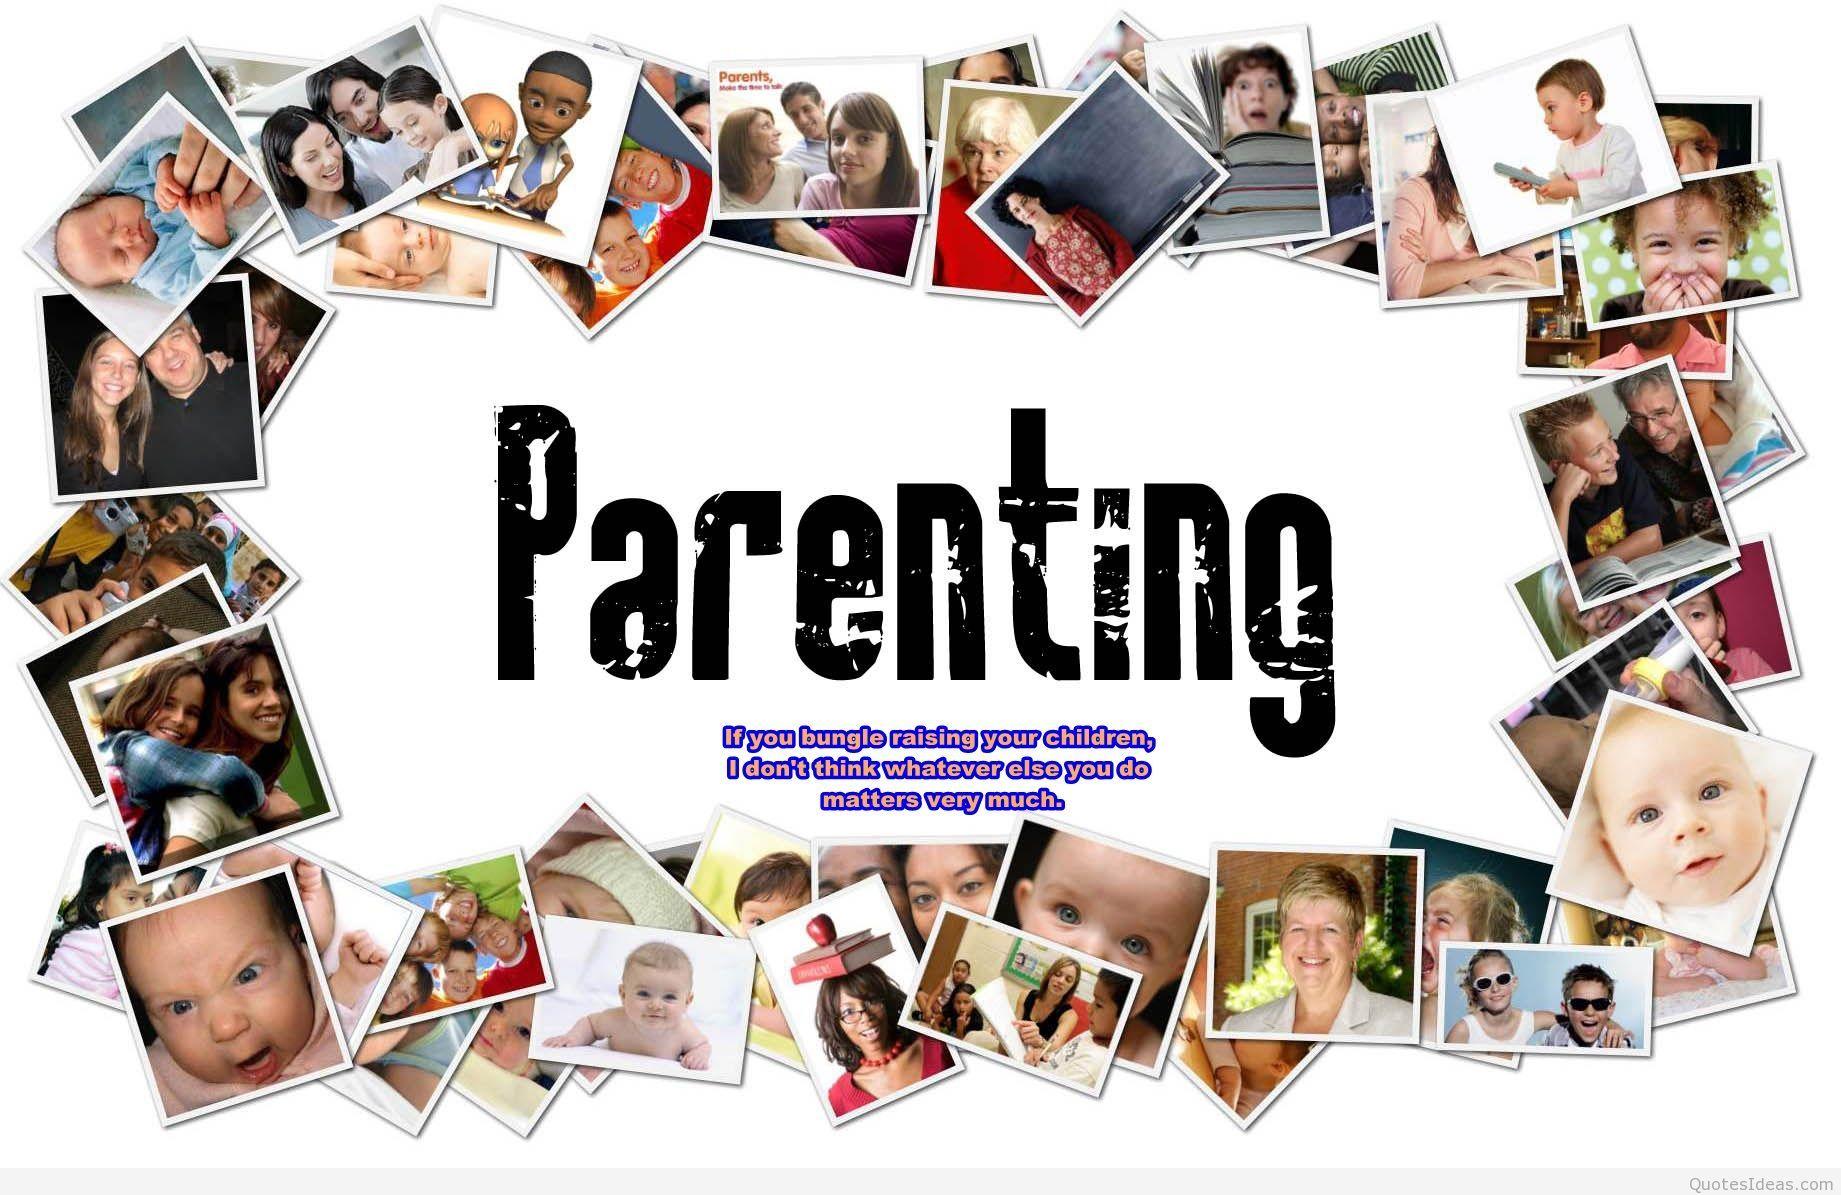 Sittervising: The Parenting Trend That Helps Moms and Kids | theSkimm